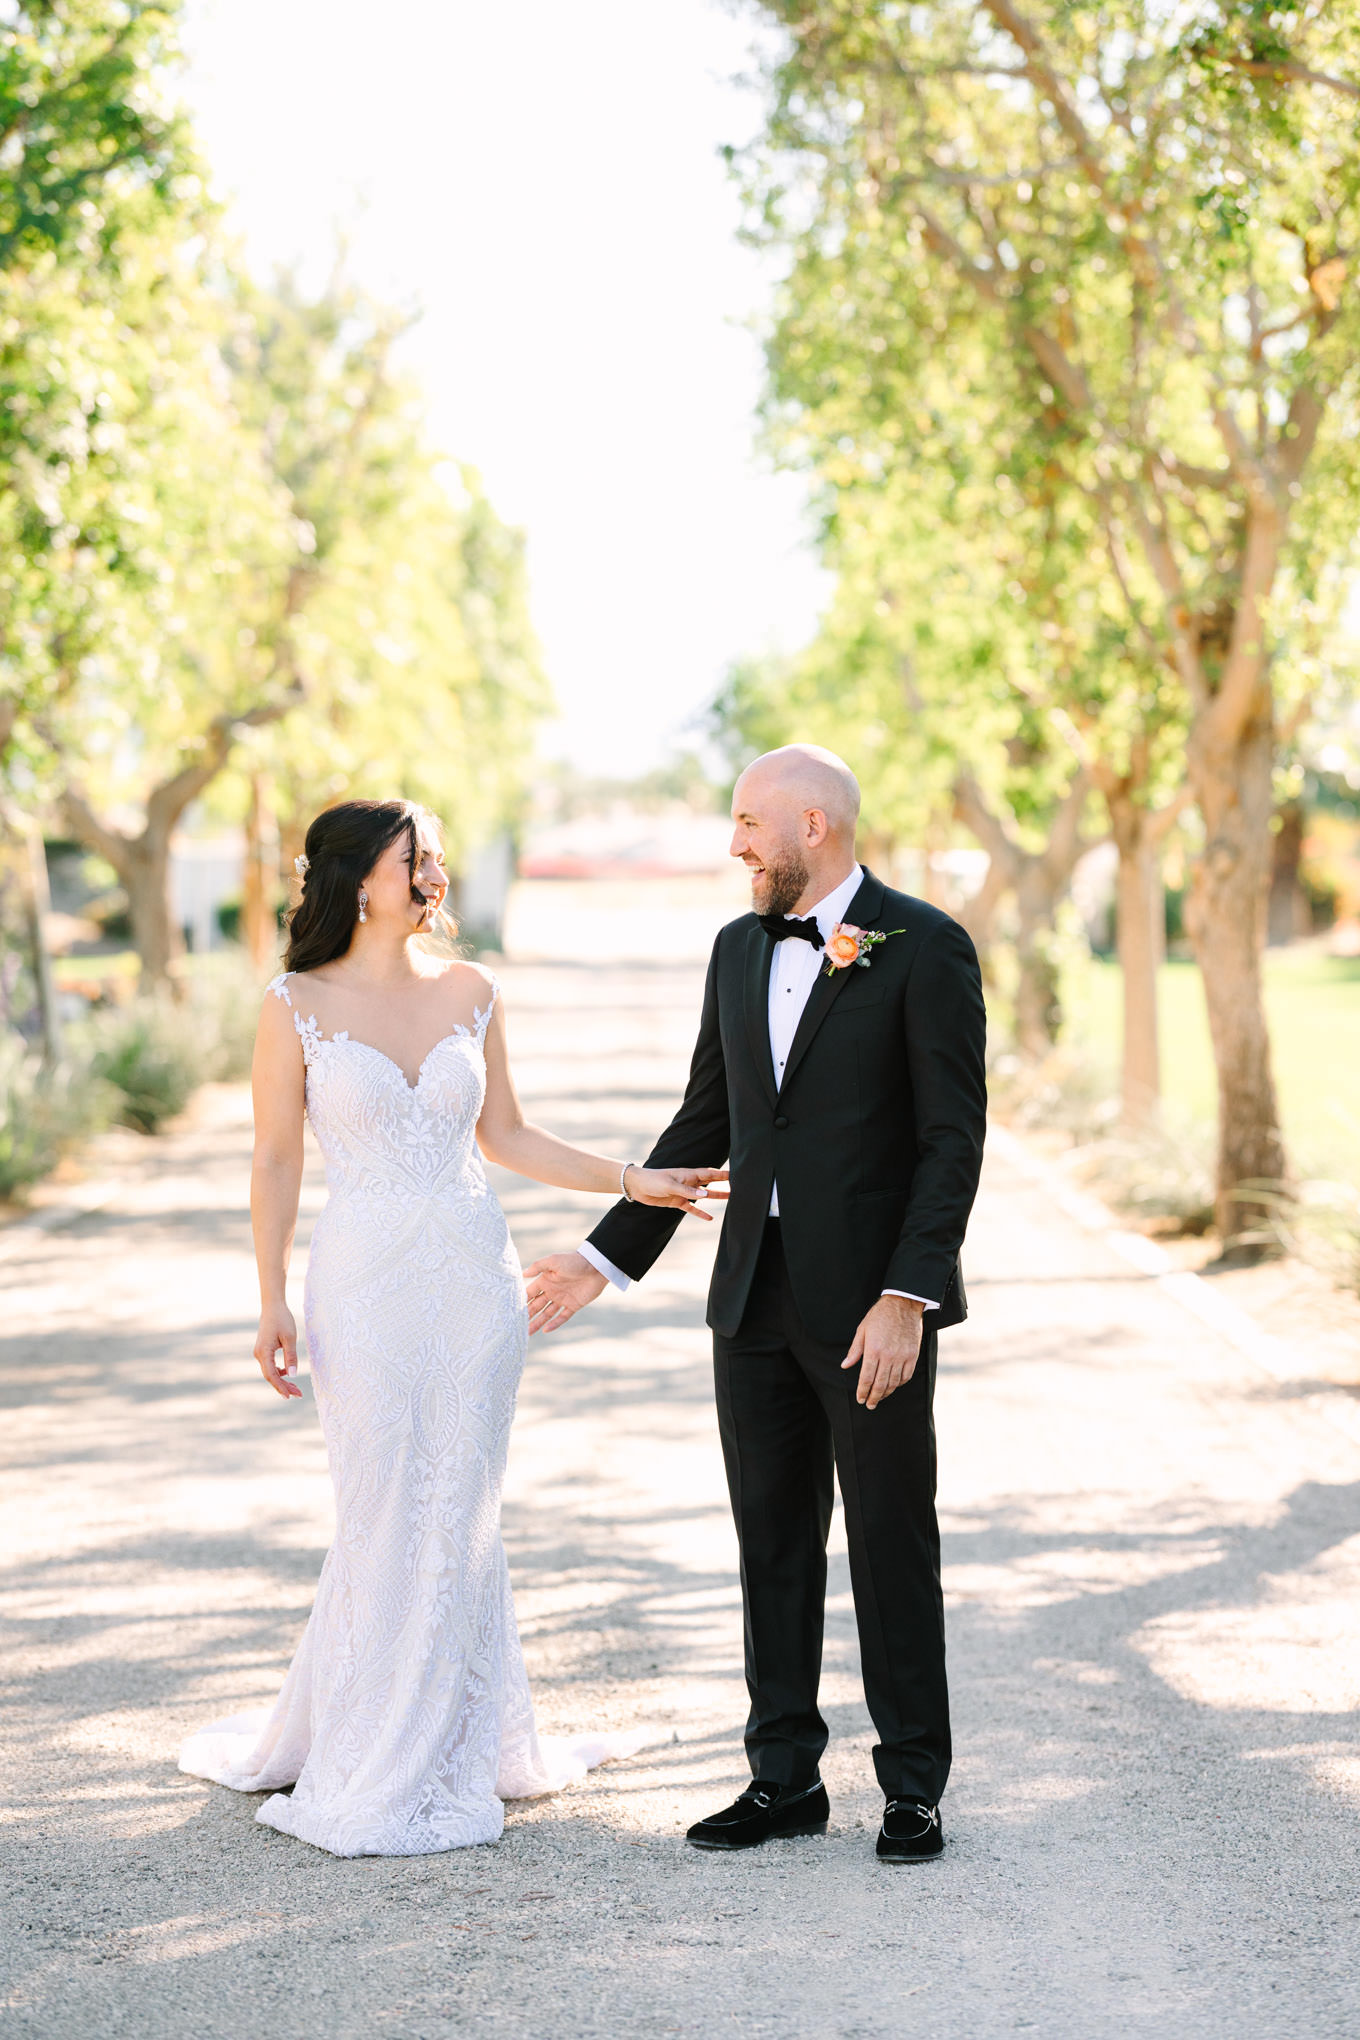 Bride and Groom | Pink Bougainvillea Estate wedding | Colorful LA wedding photography | #bougainvilleaestate #palmspringswedding #palmspringsweddingvenue #palmspringsphotographer Source: Mary Costa Photography | Los Angeles